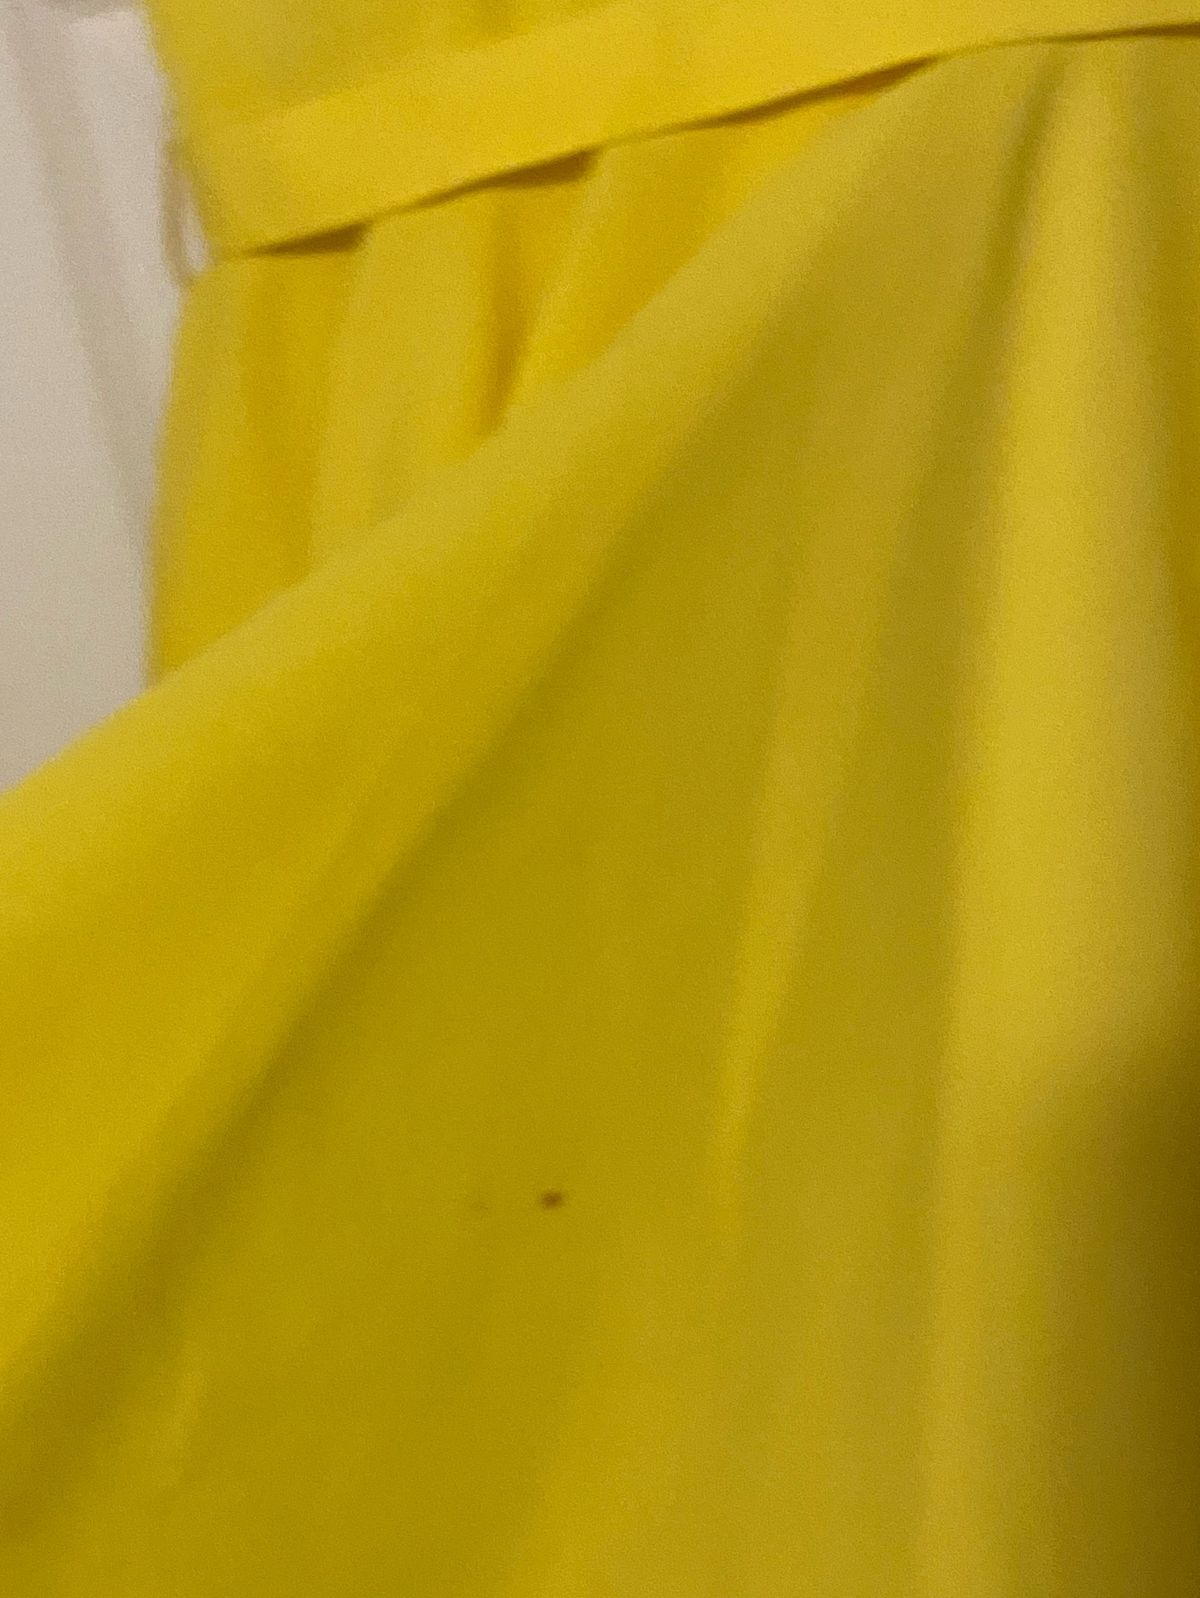 Mac Duggal Size 6 Yellow Cocktail Dress on Queenly